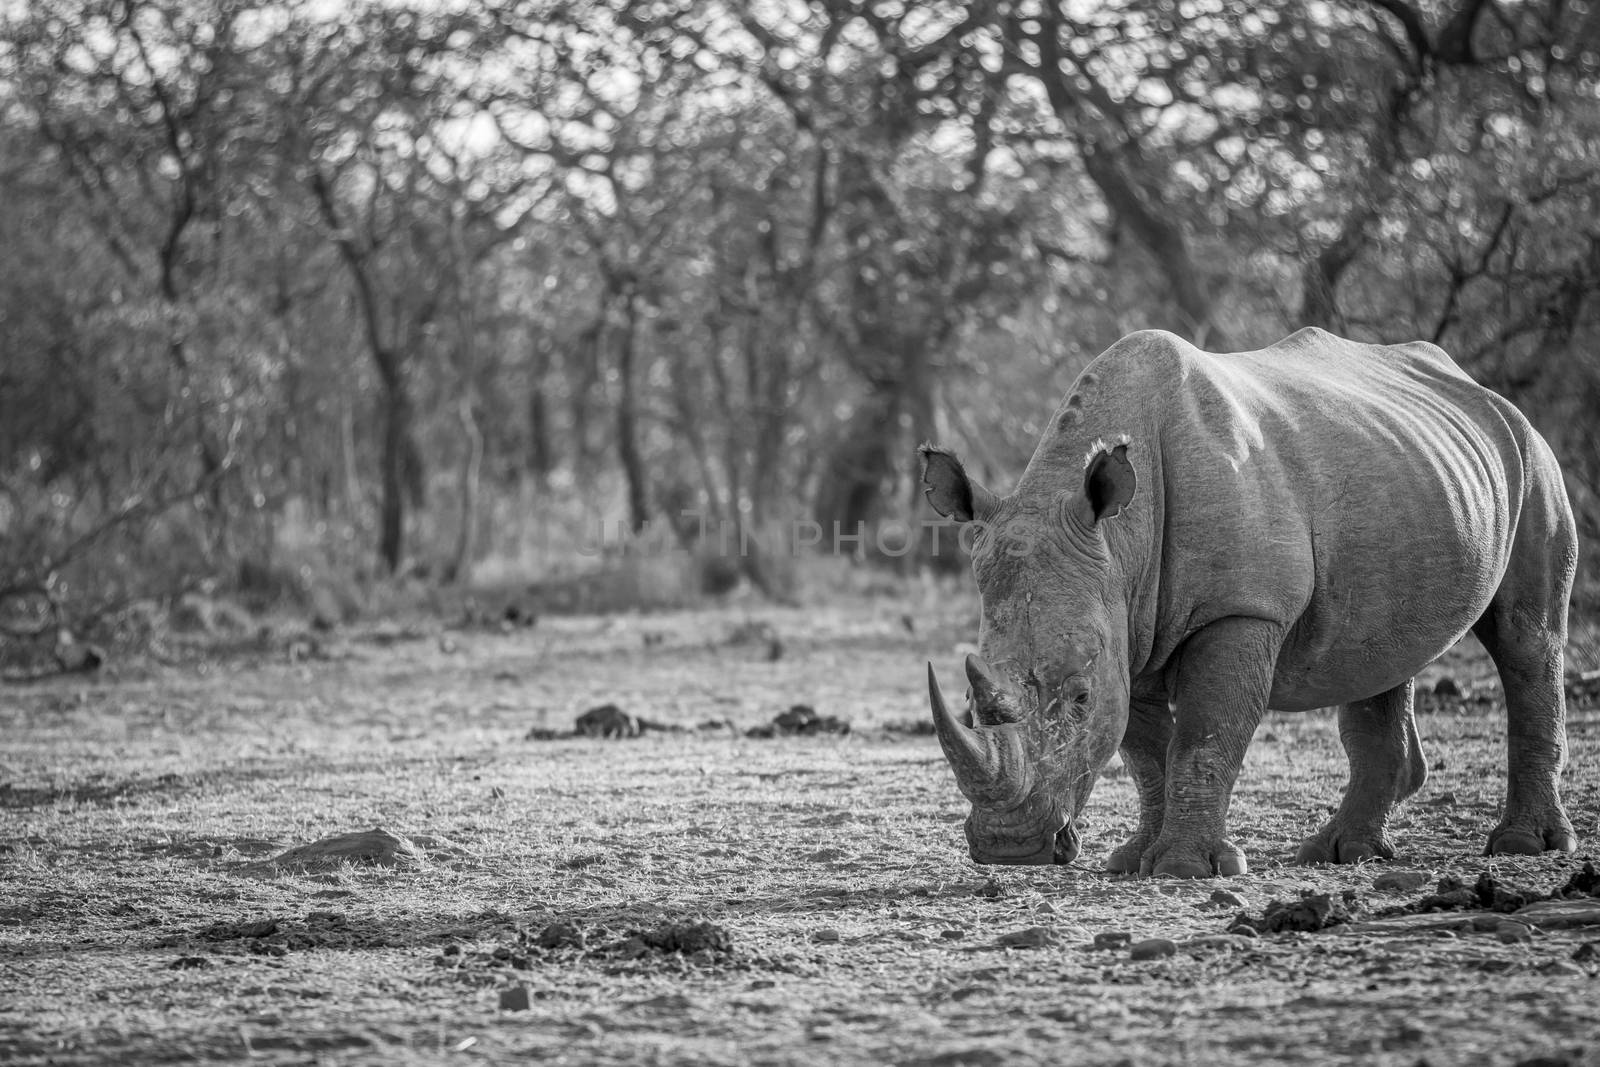 White rhino standing in black and white in the grass, South Africa.